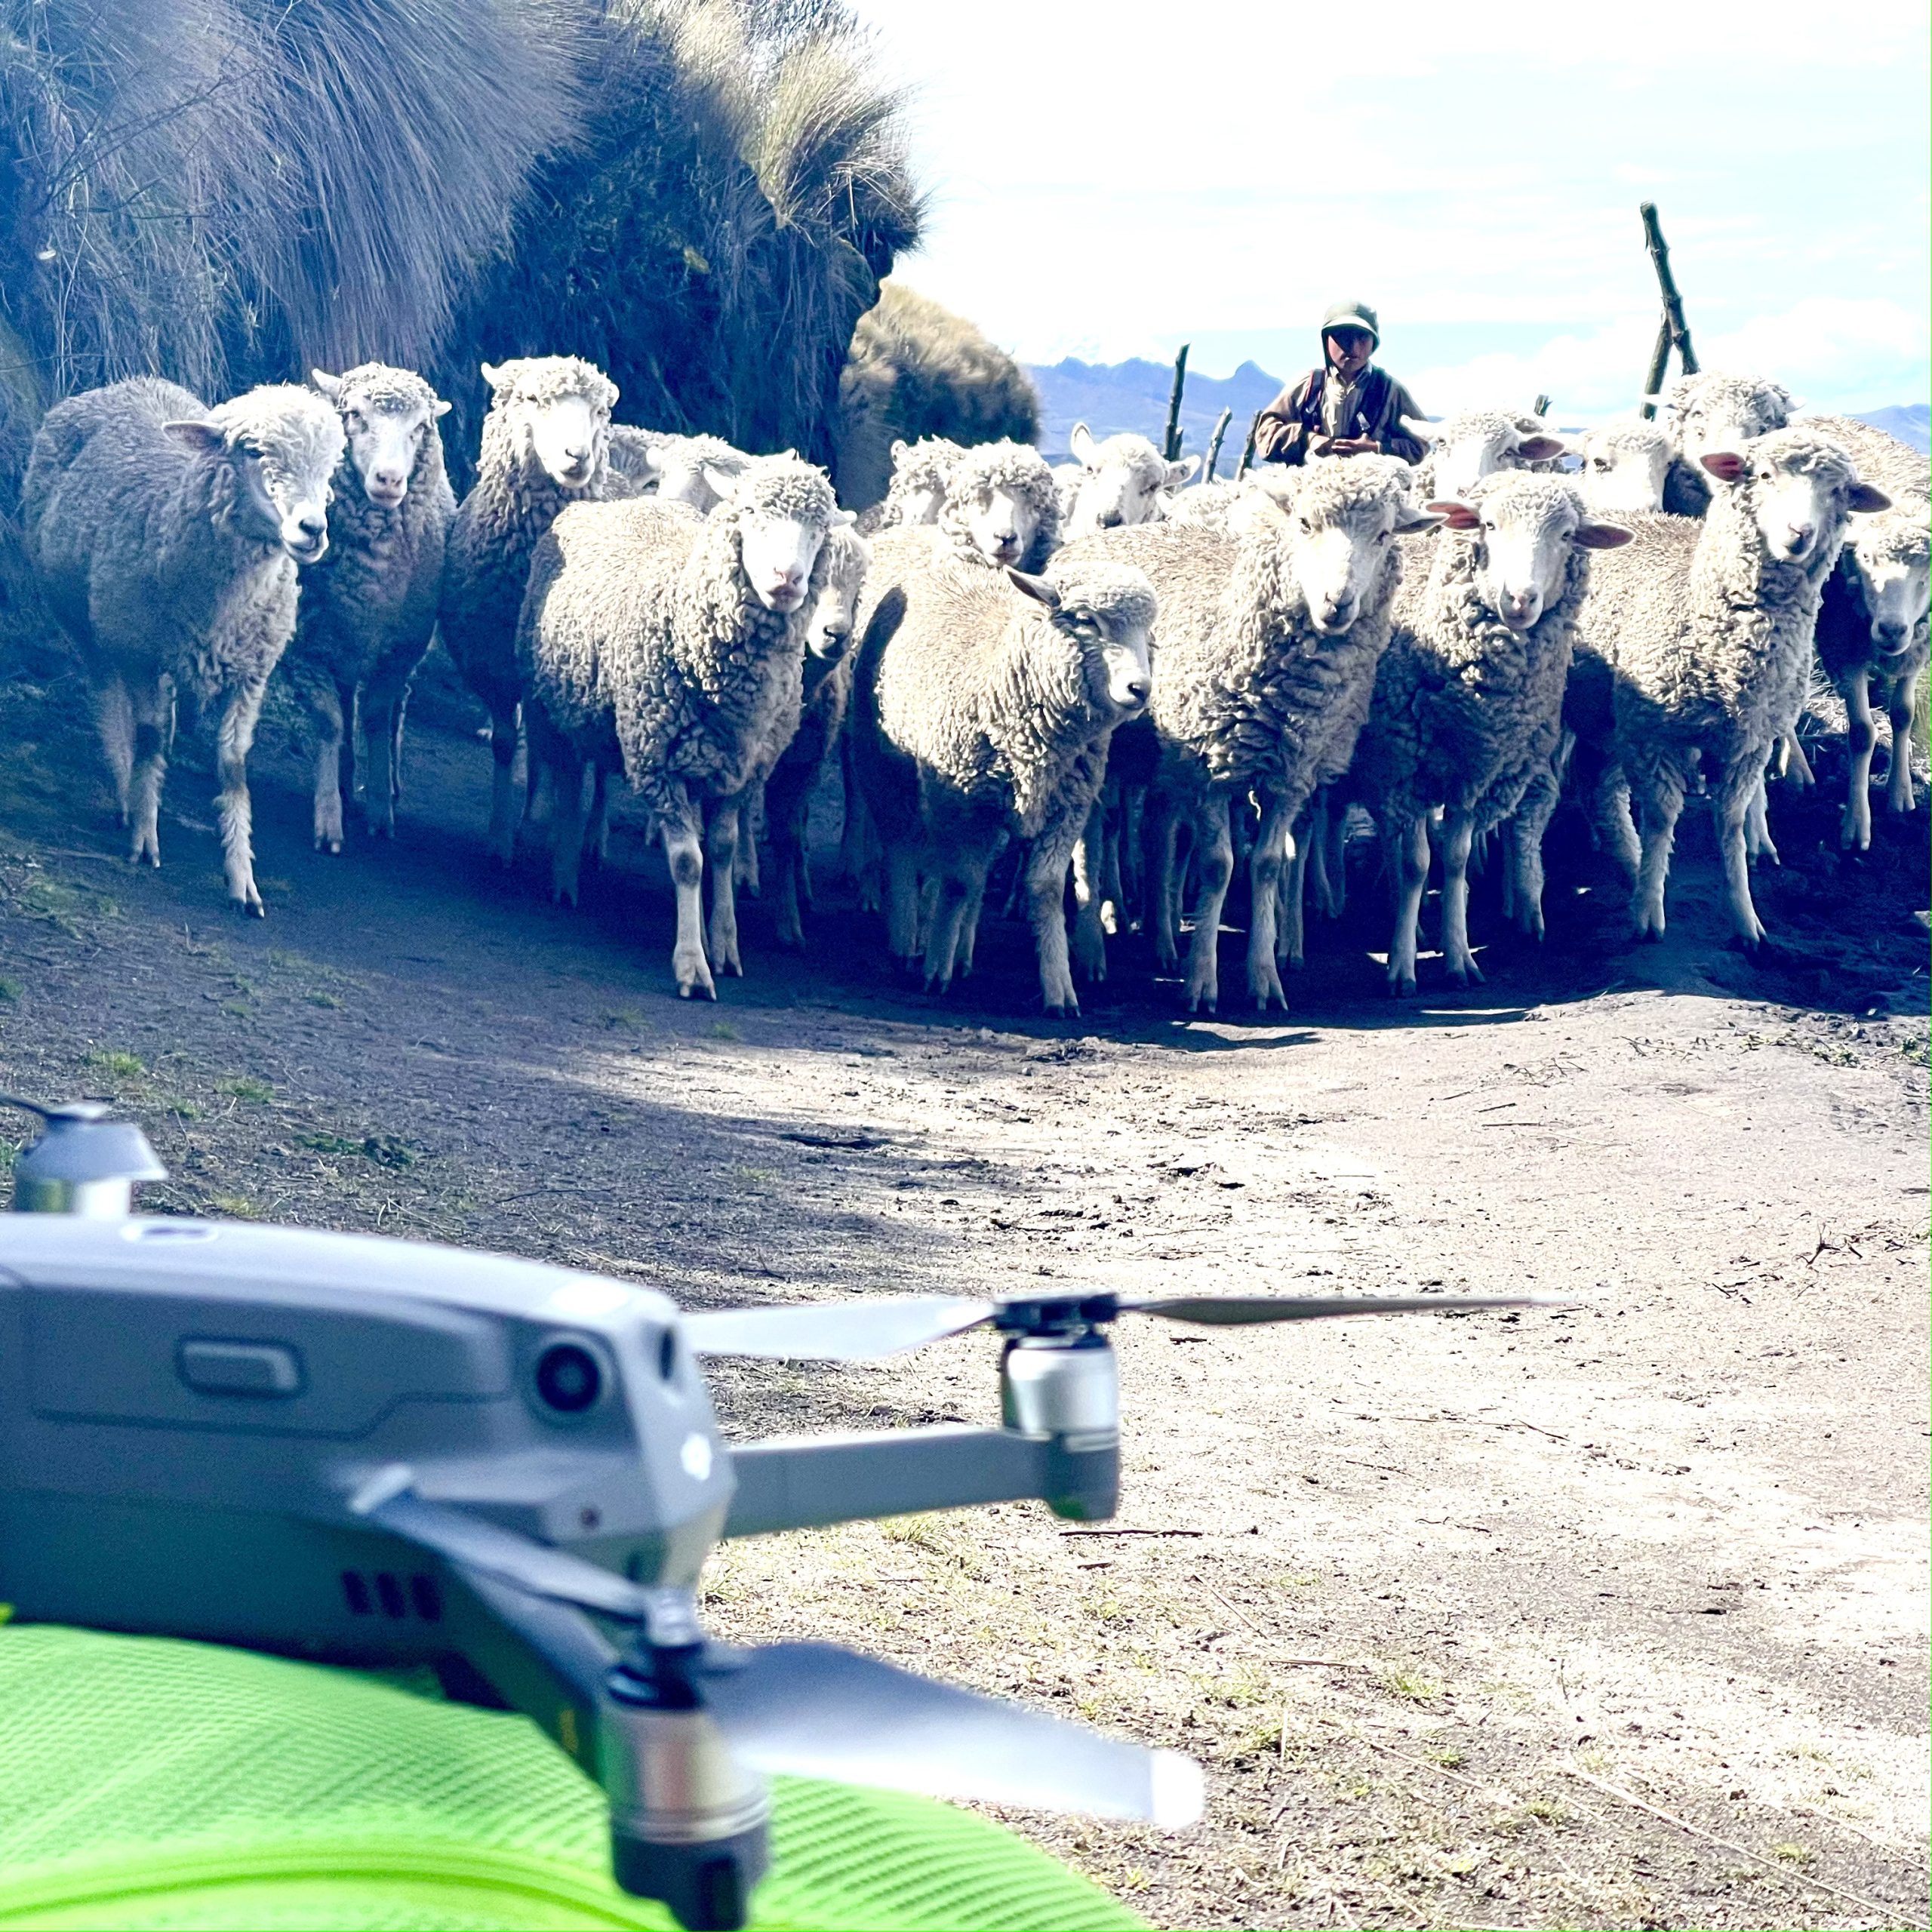 Drone shot of sheep in the Andes curiously looking at landed wonder